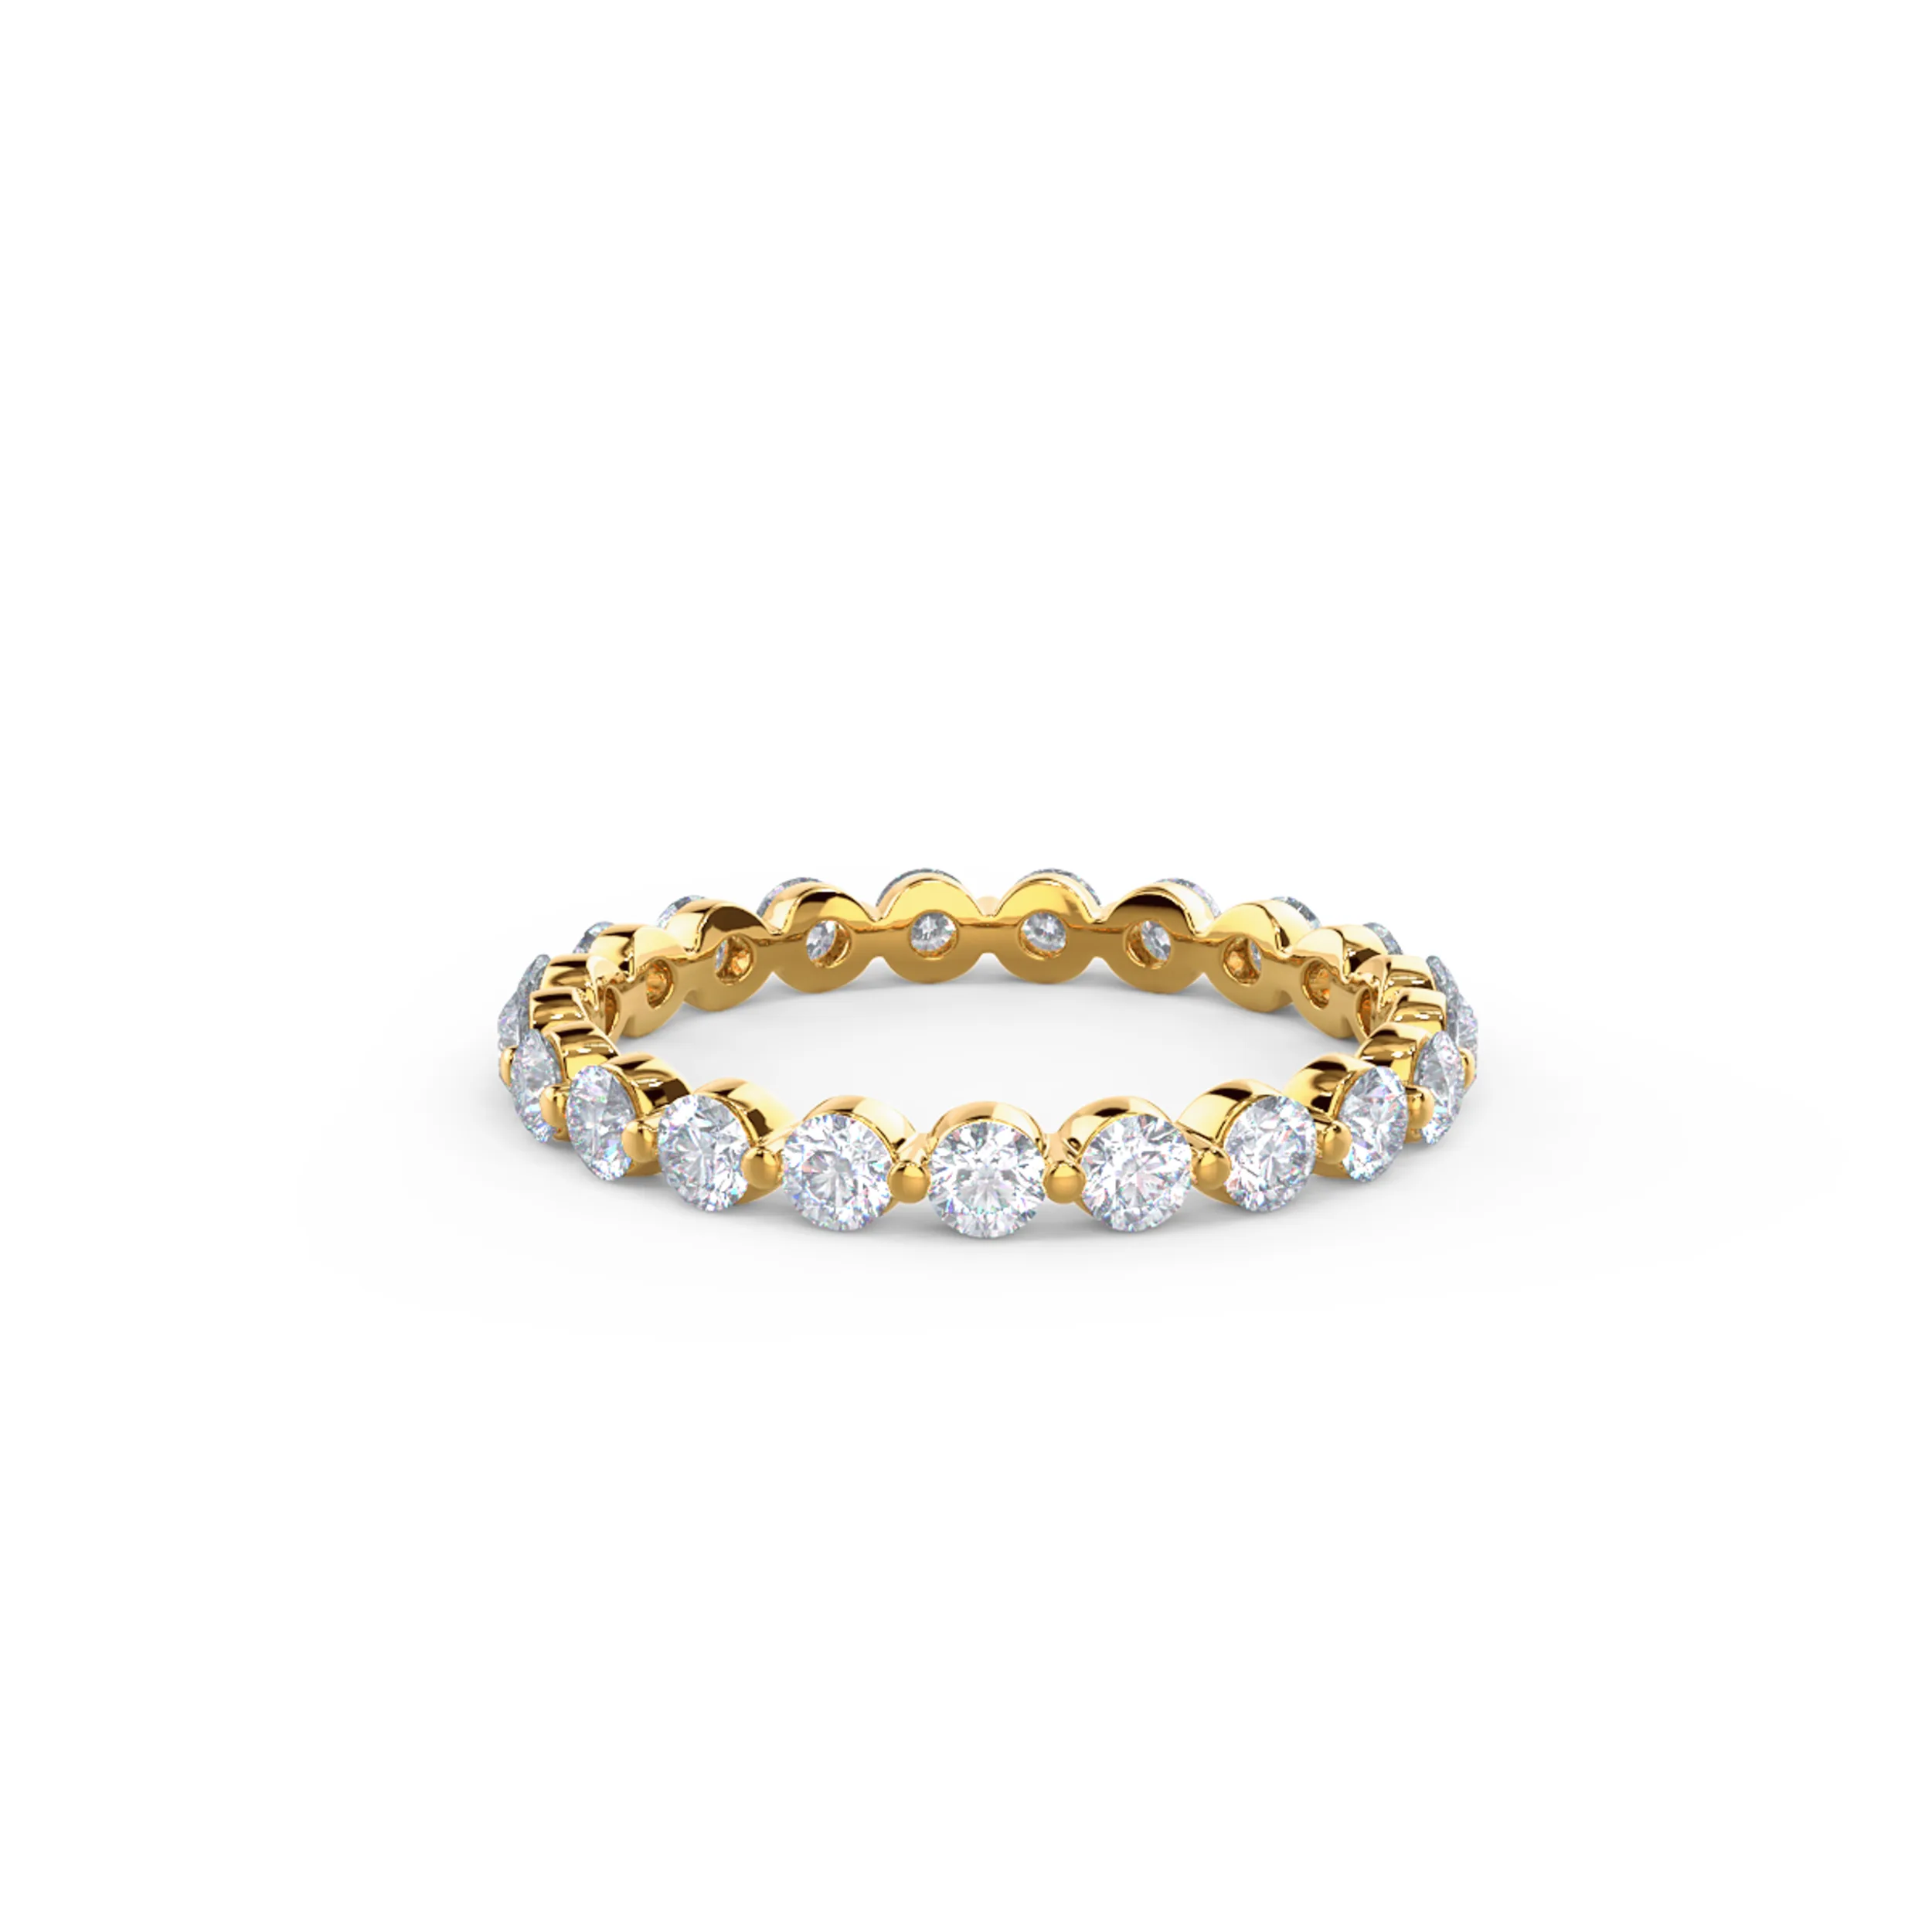 1.0 ct Round Brilliant Lab Diamonds Shared Prong Eternity Band in Yellow Gold (Main View)